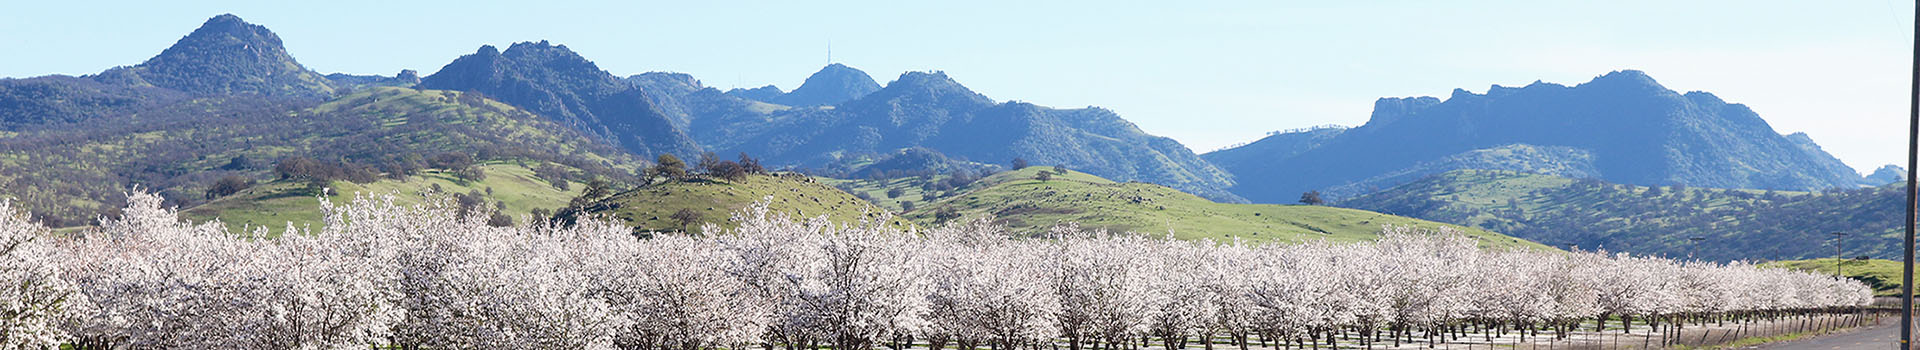 Almond Orchard with Sutter Buttes - Photo Credit: Sutter County Ag Department